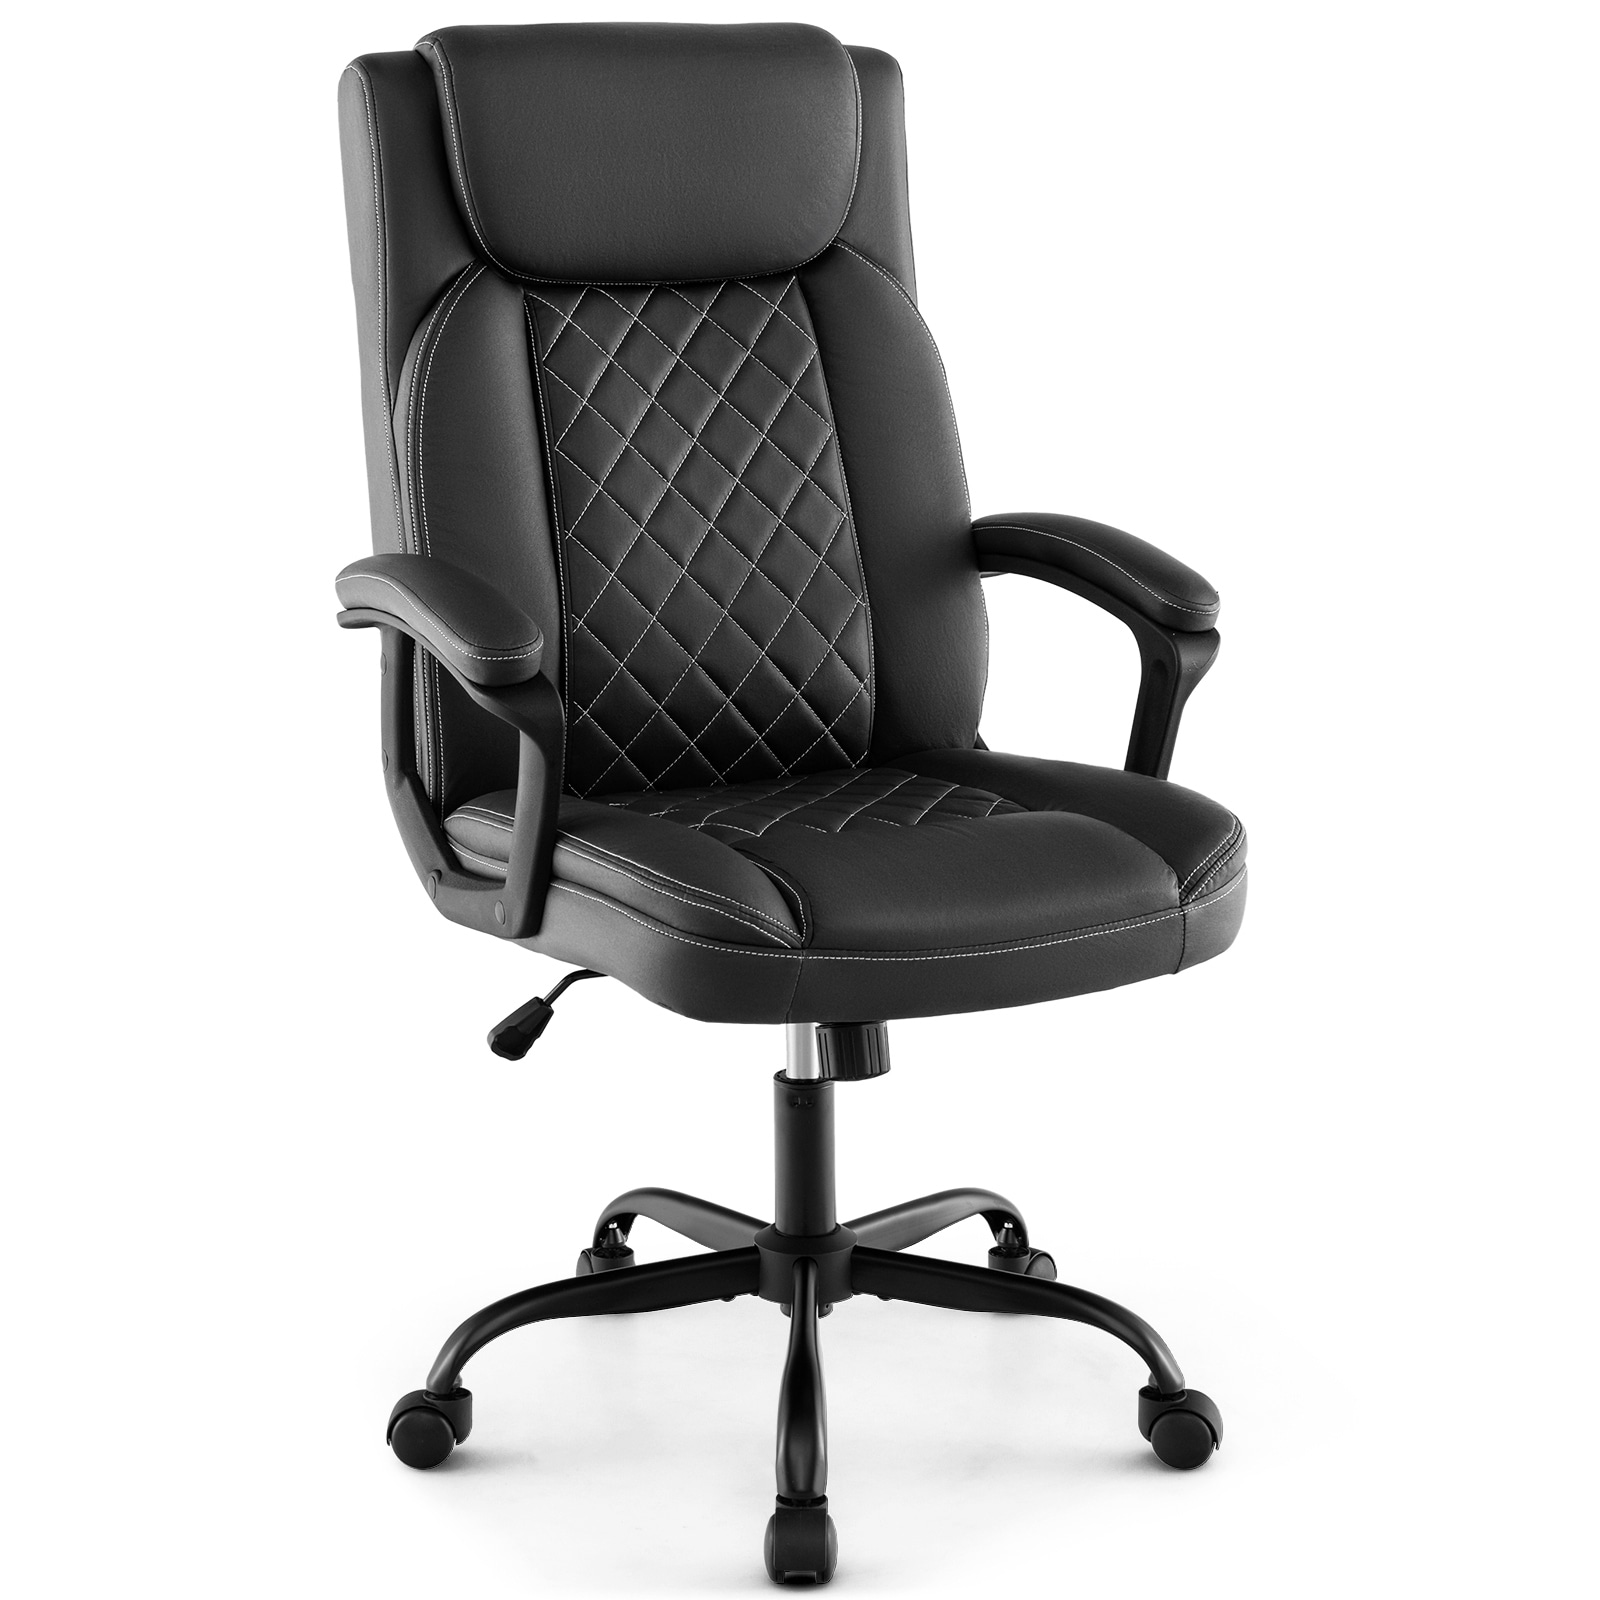 Ergonomic Desk Chair with Lumbar Support and Rocking Function-Black | Costway